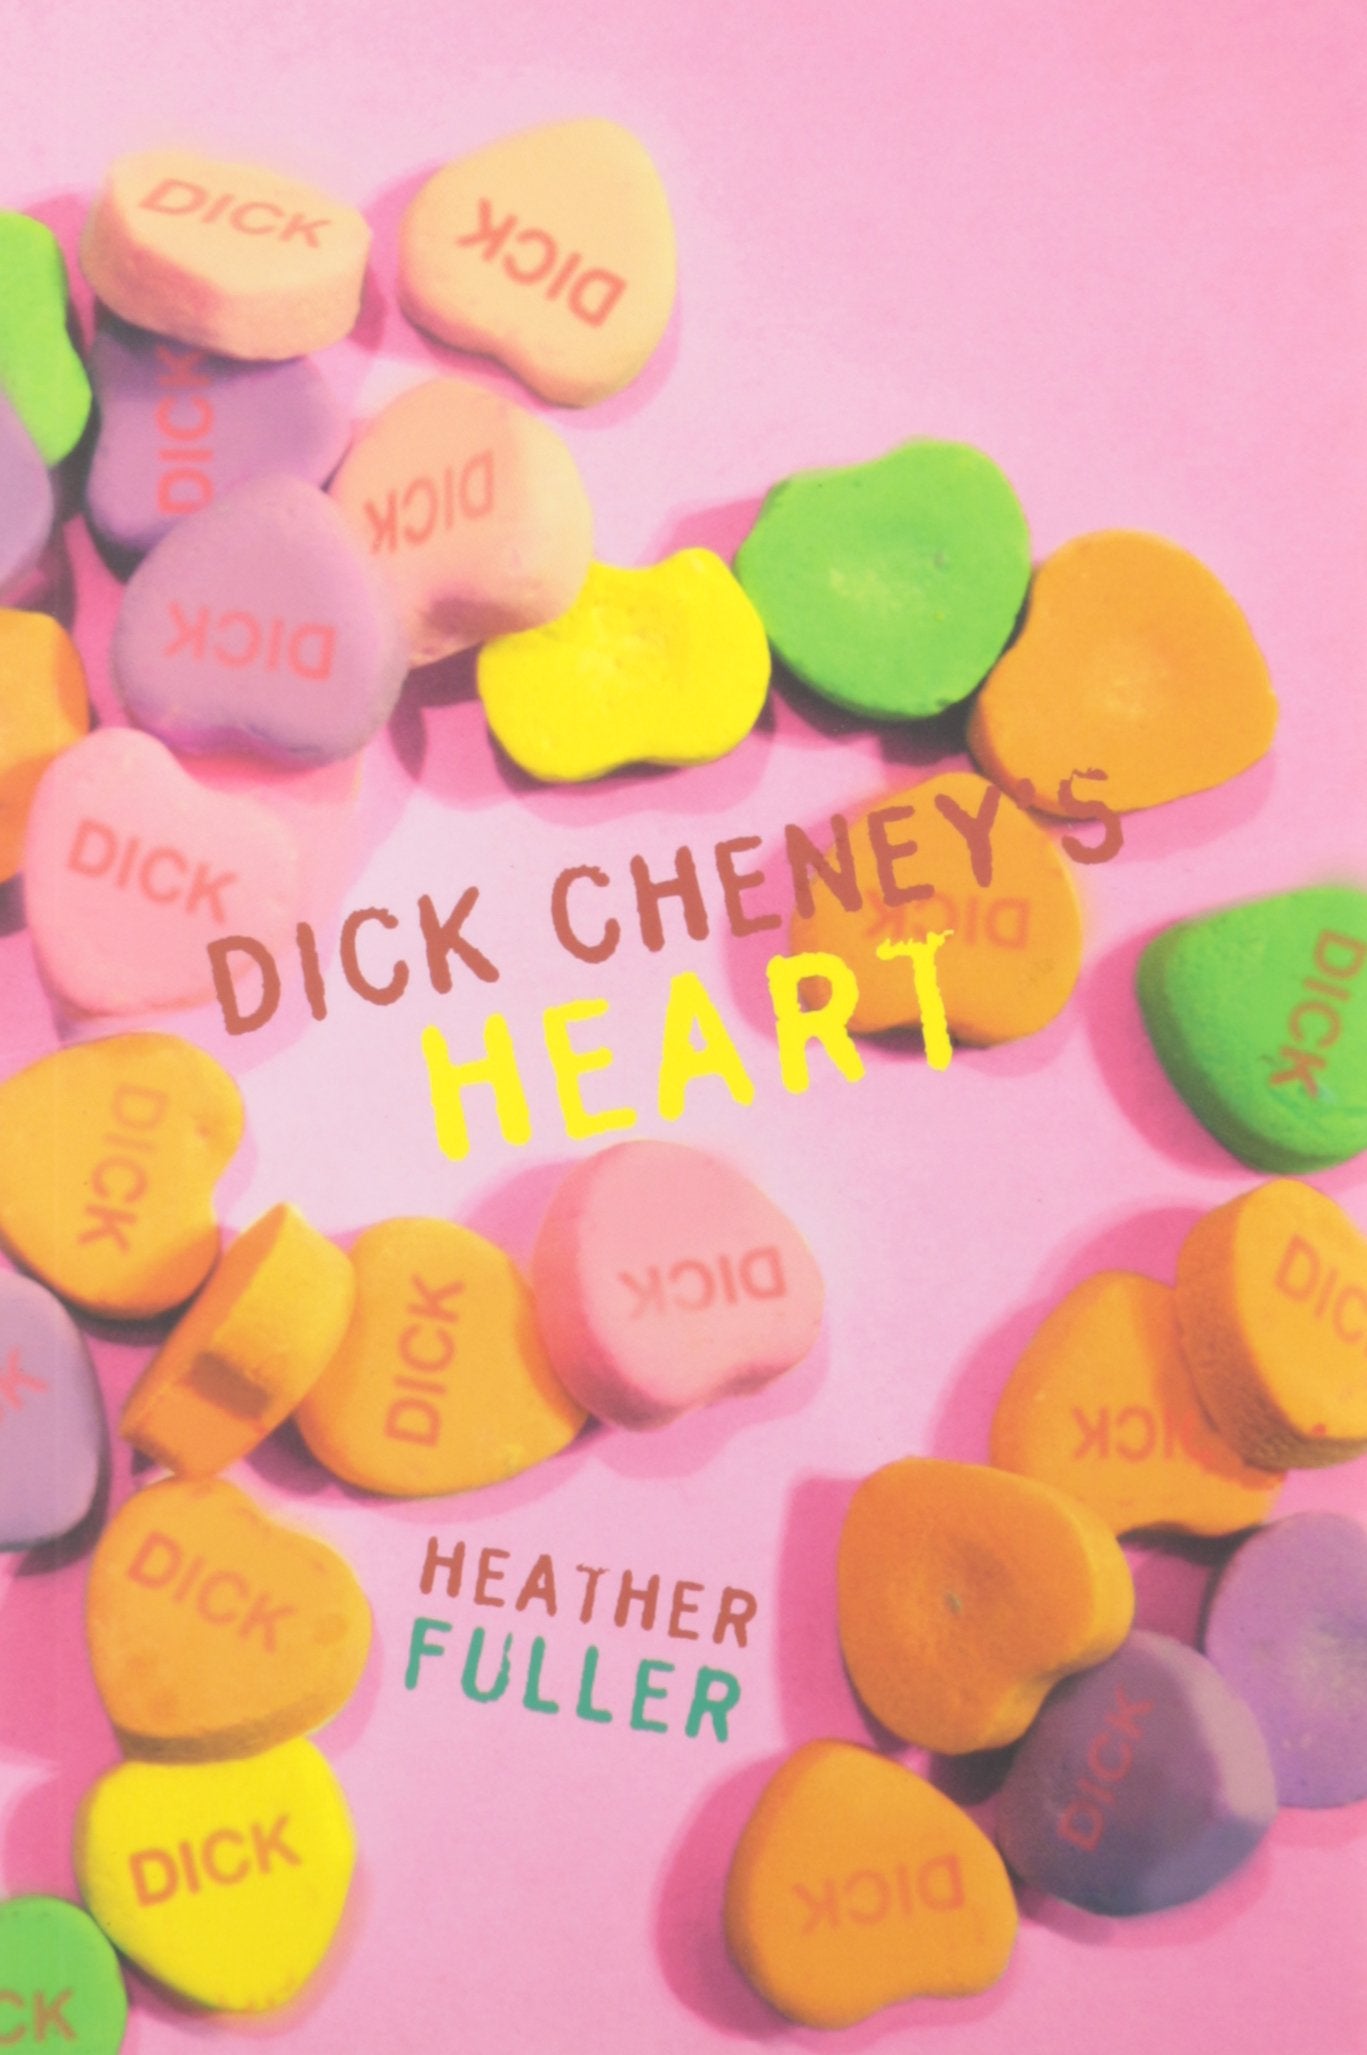 Dick Cheney's Heart, by Heather Fuller